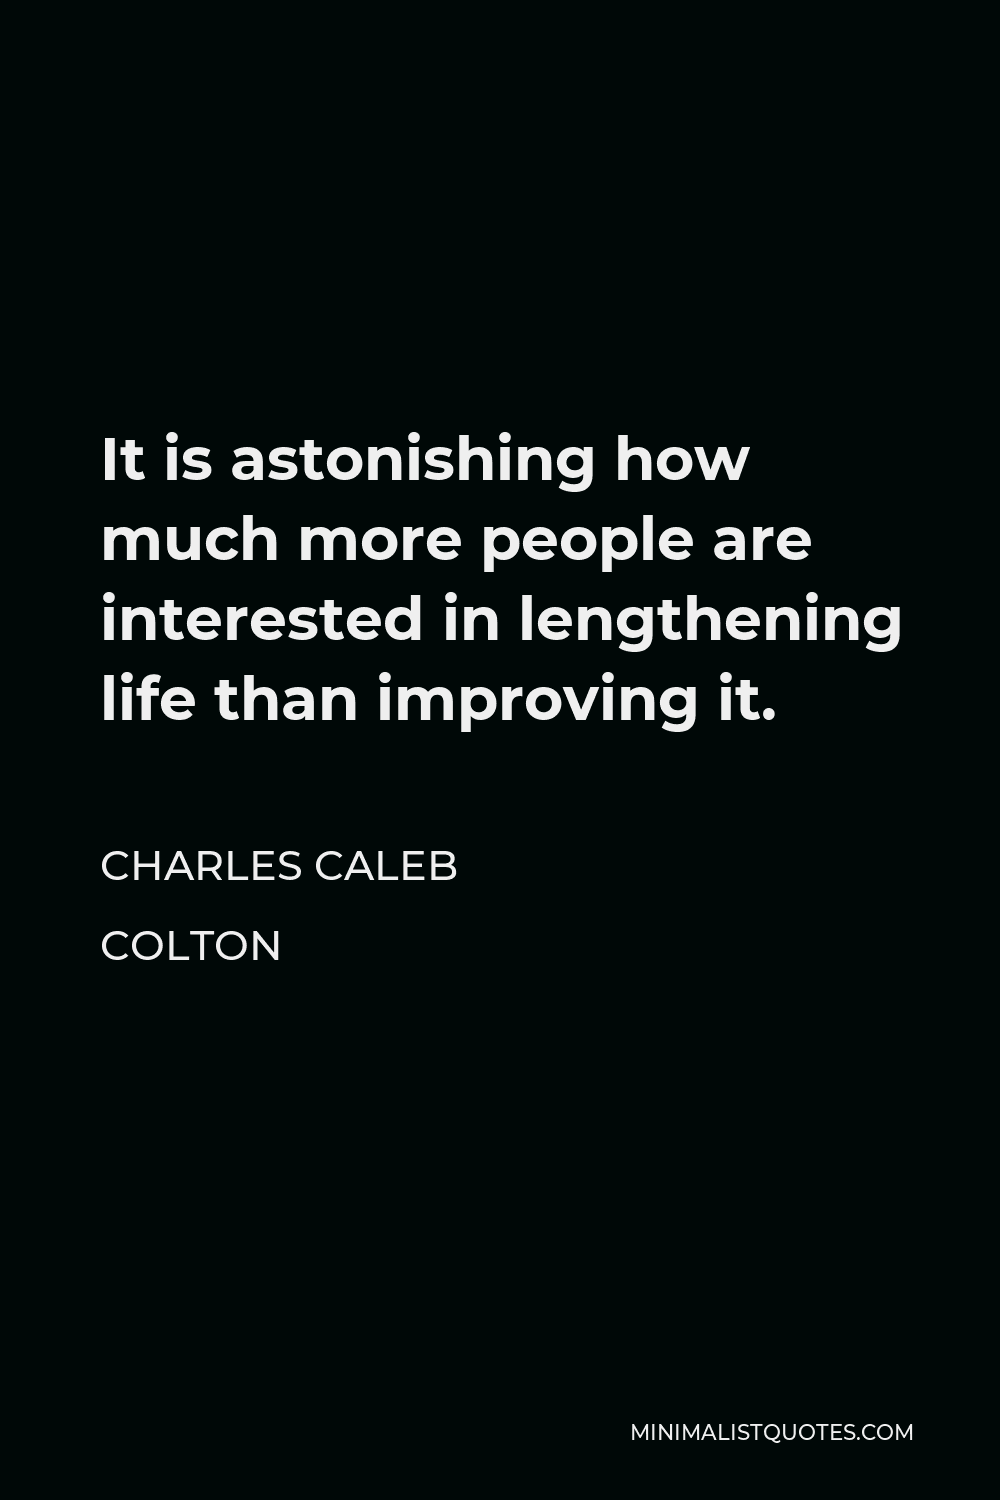 Charles Caleb Colton Quote - It is astonishing how much more people are interested in lengthening life than improving it.